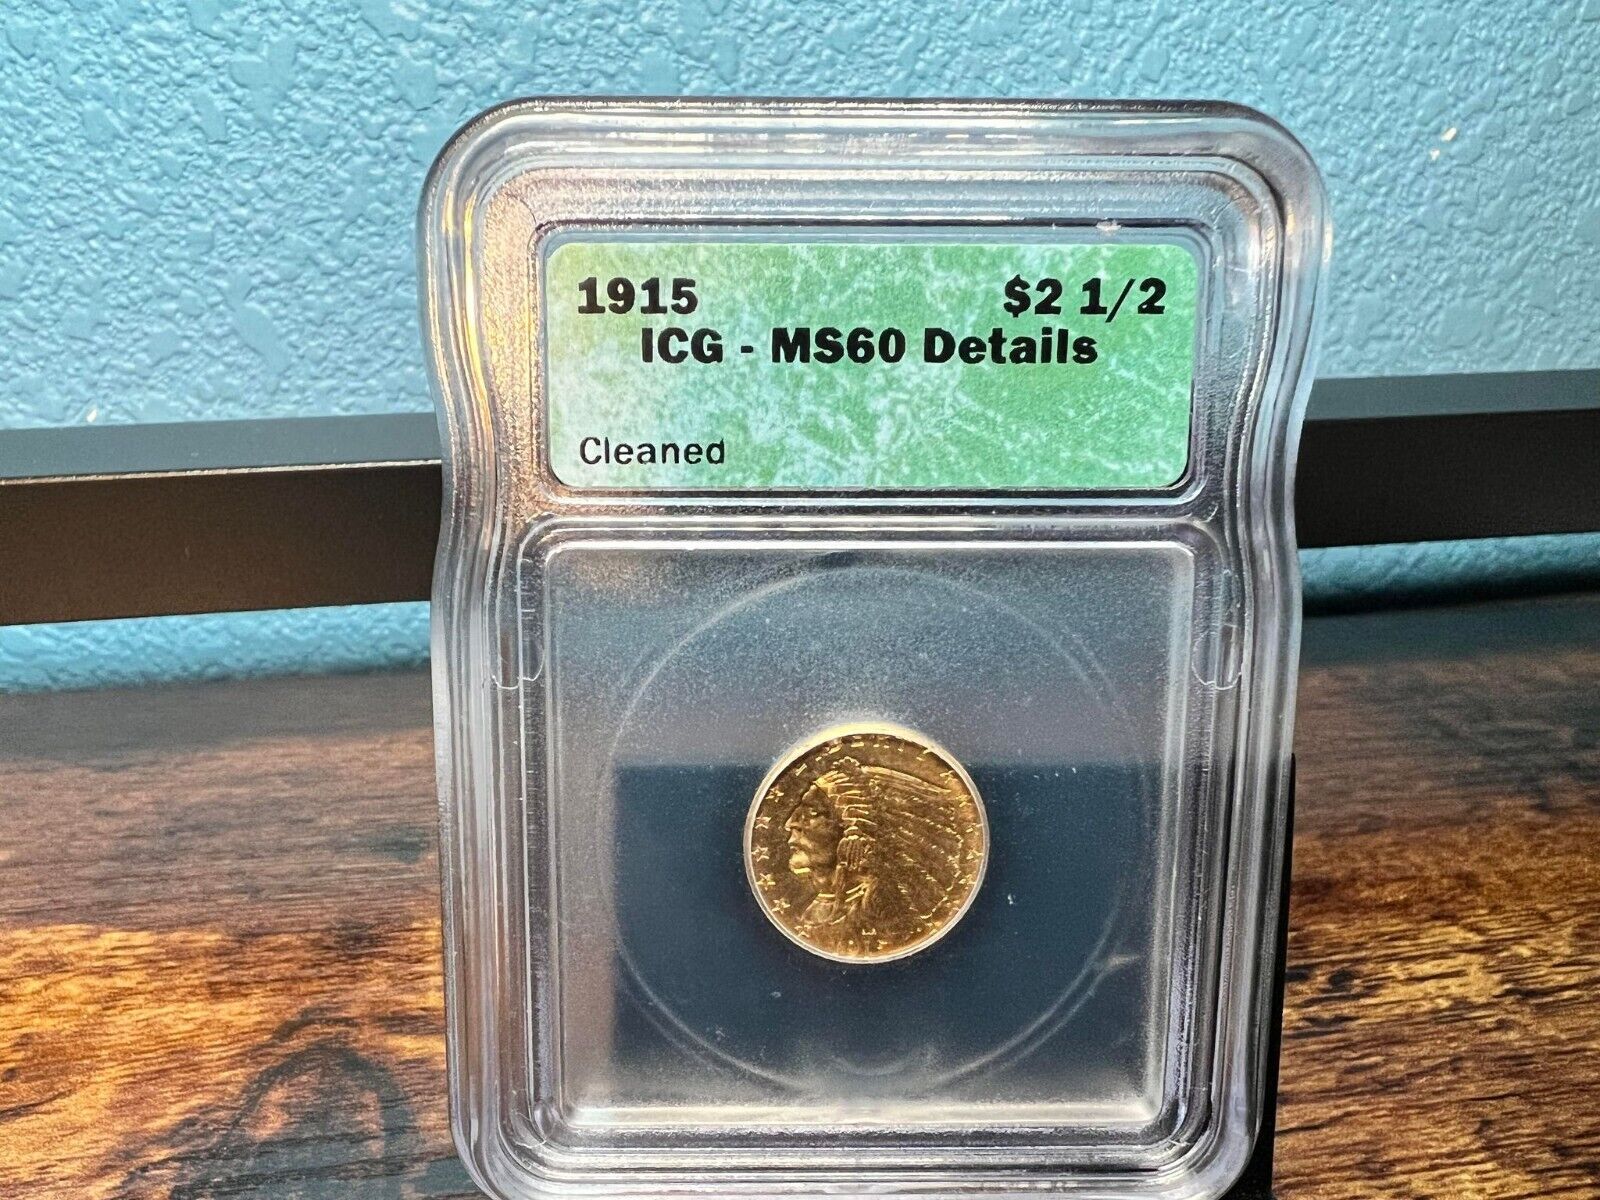 1915 Gold 2 1/2  Indian - Icg Graded Ms-60 Details (cleaned)